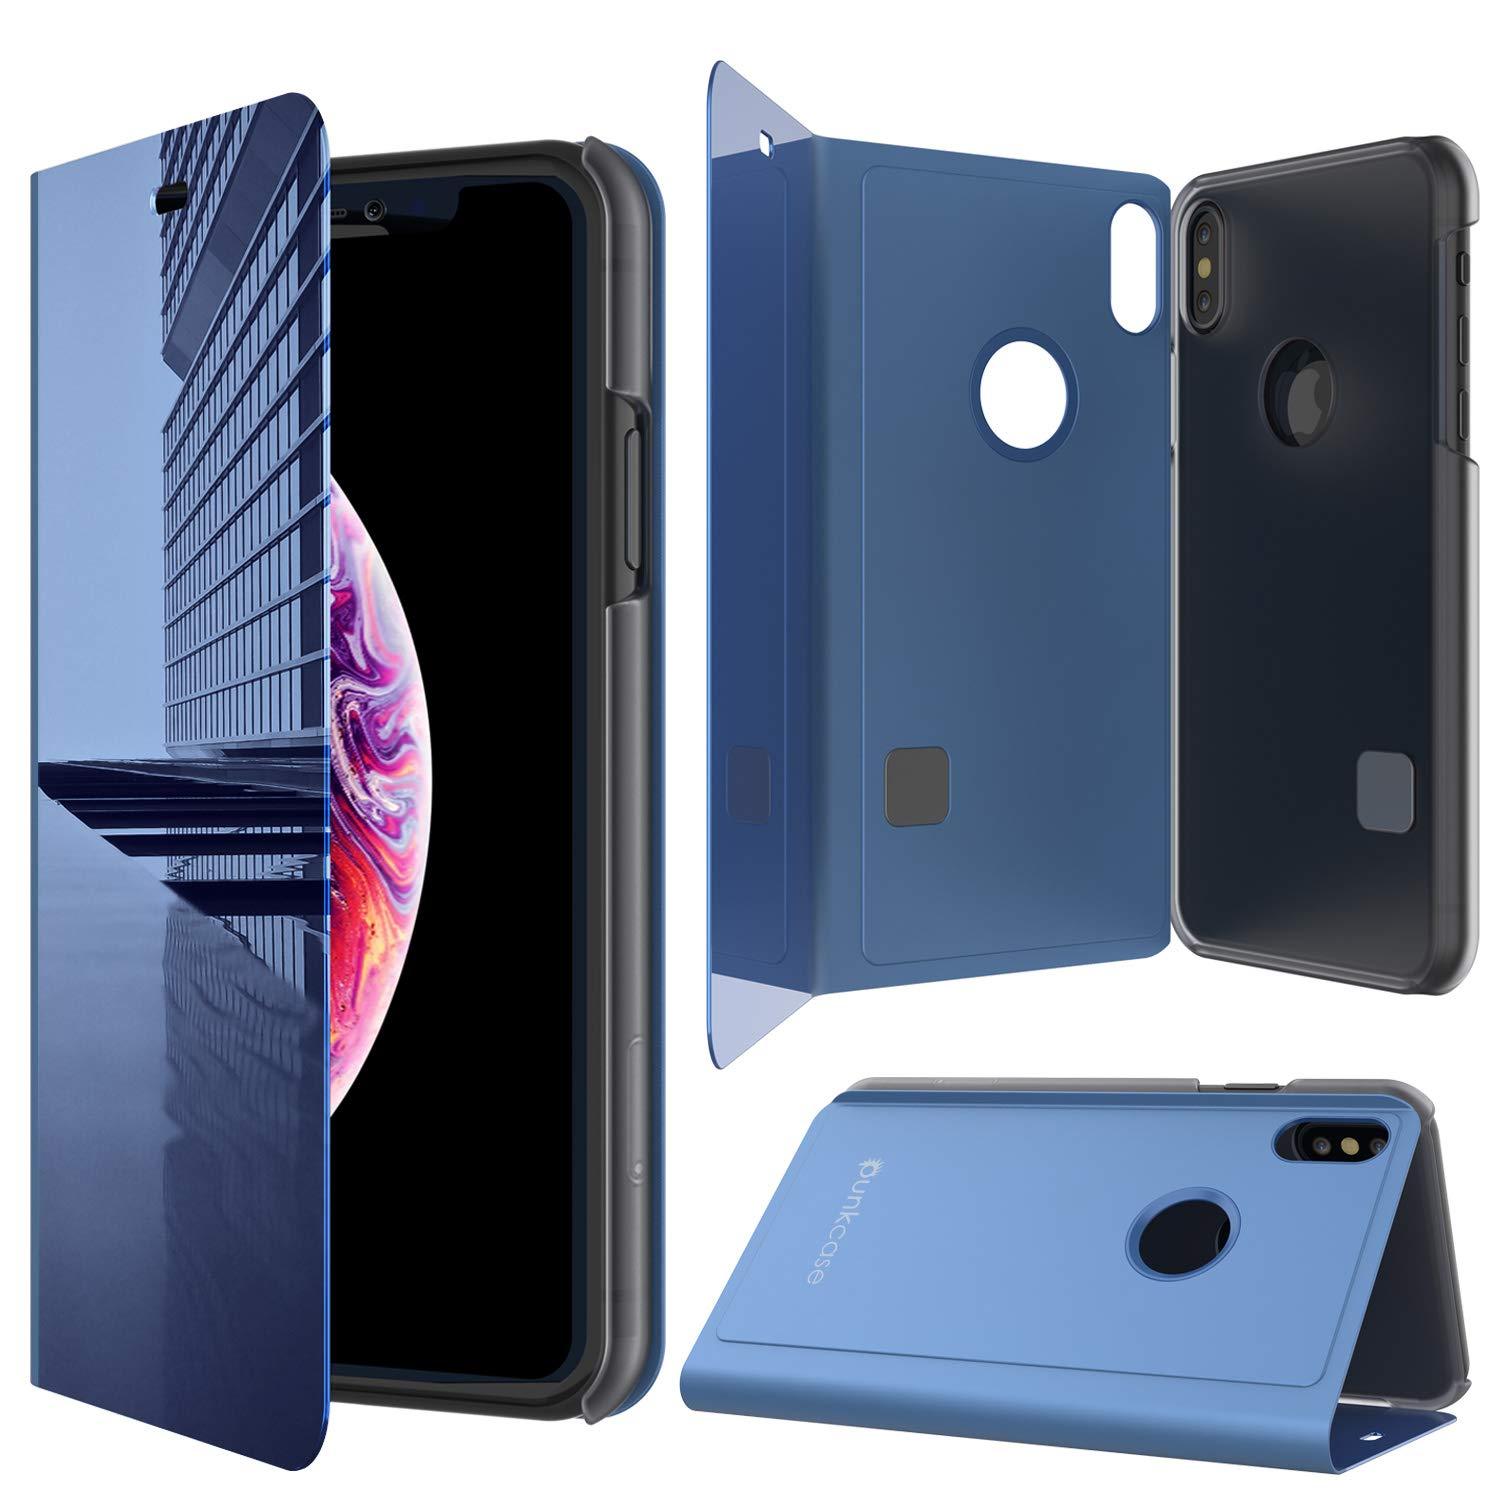 Punkcase iPhone XS Max Reflector Case Protective Flip Cover [Blue]